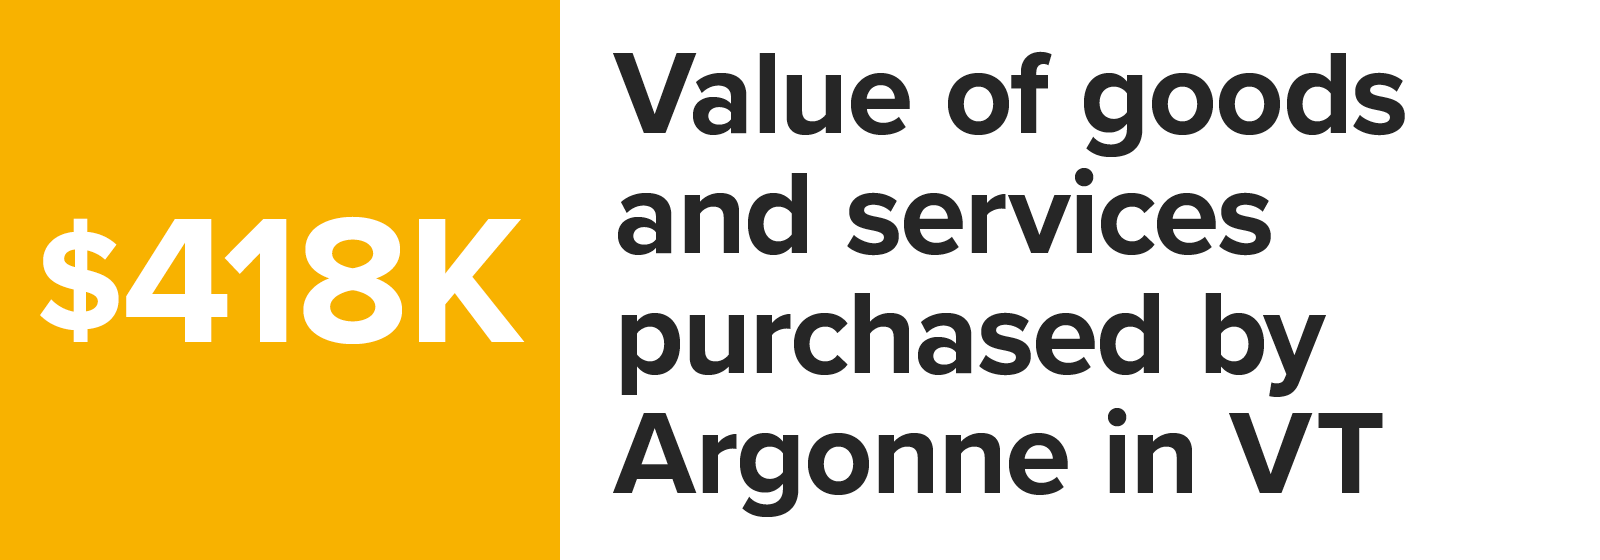 Number graphic value of goods and services purchased by Argonne in Vermont